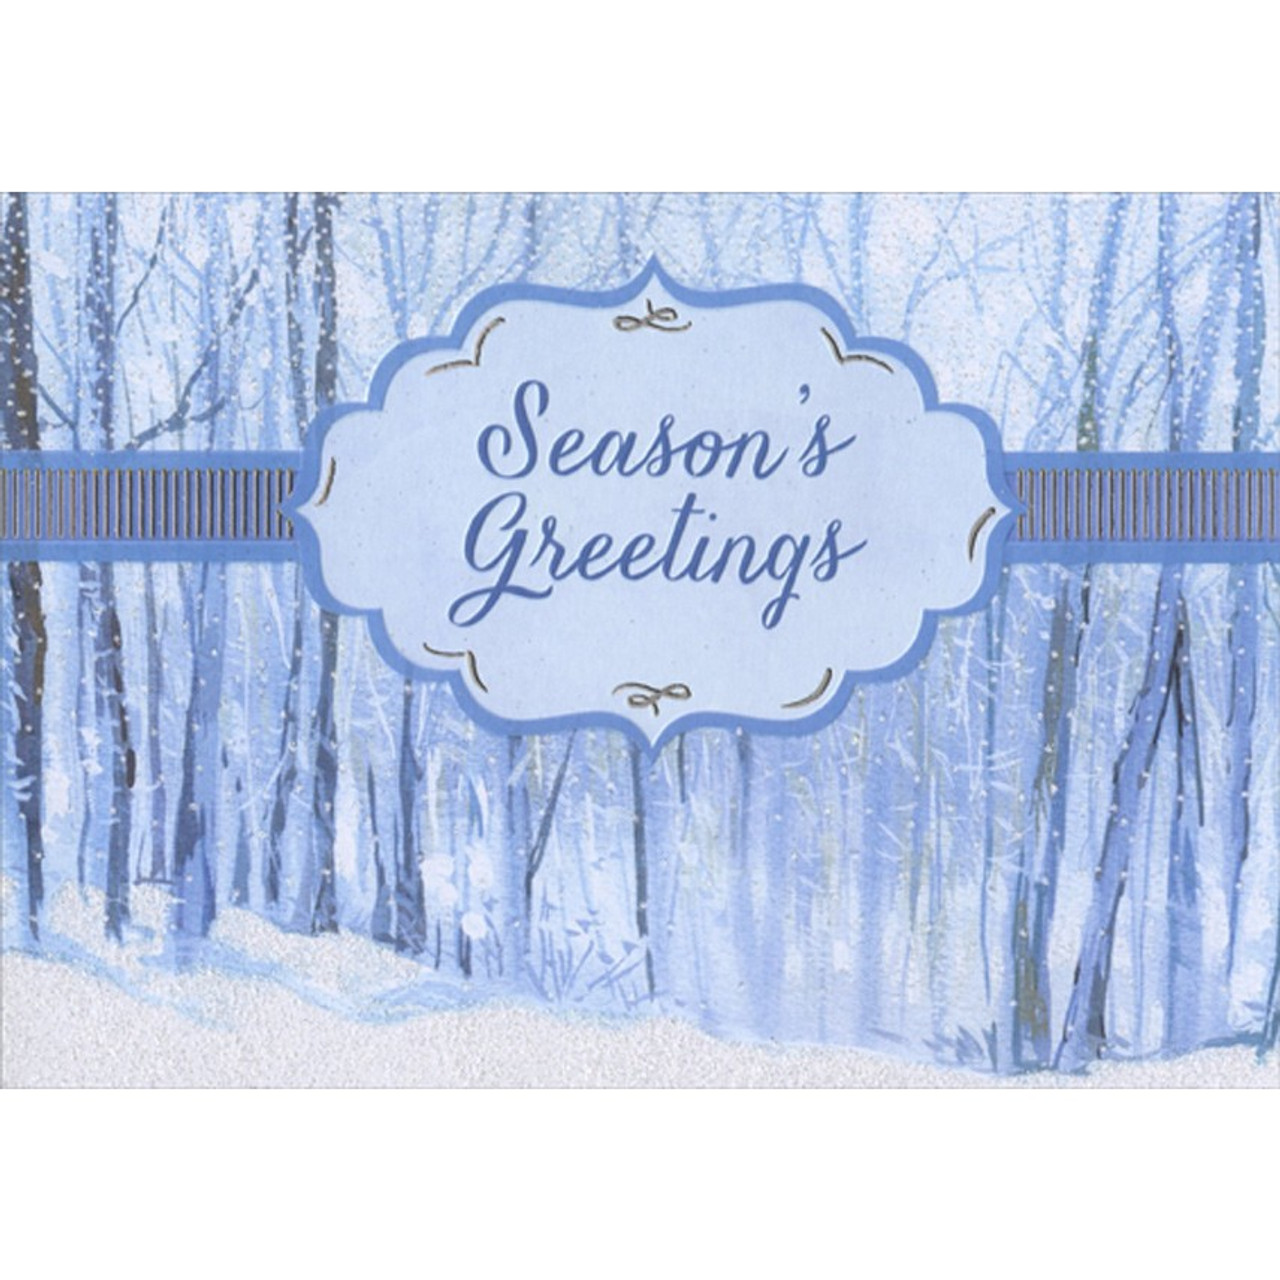 Season's　Winter　Greetings　of　18　Trees　in　Blue　Box　Christmas　Cards